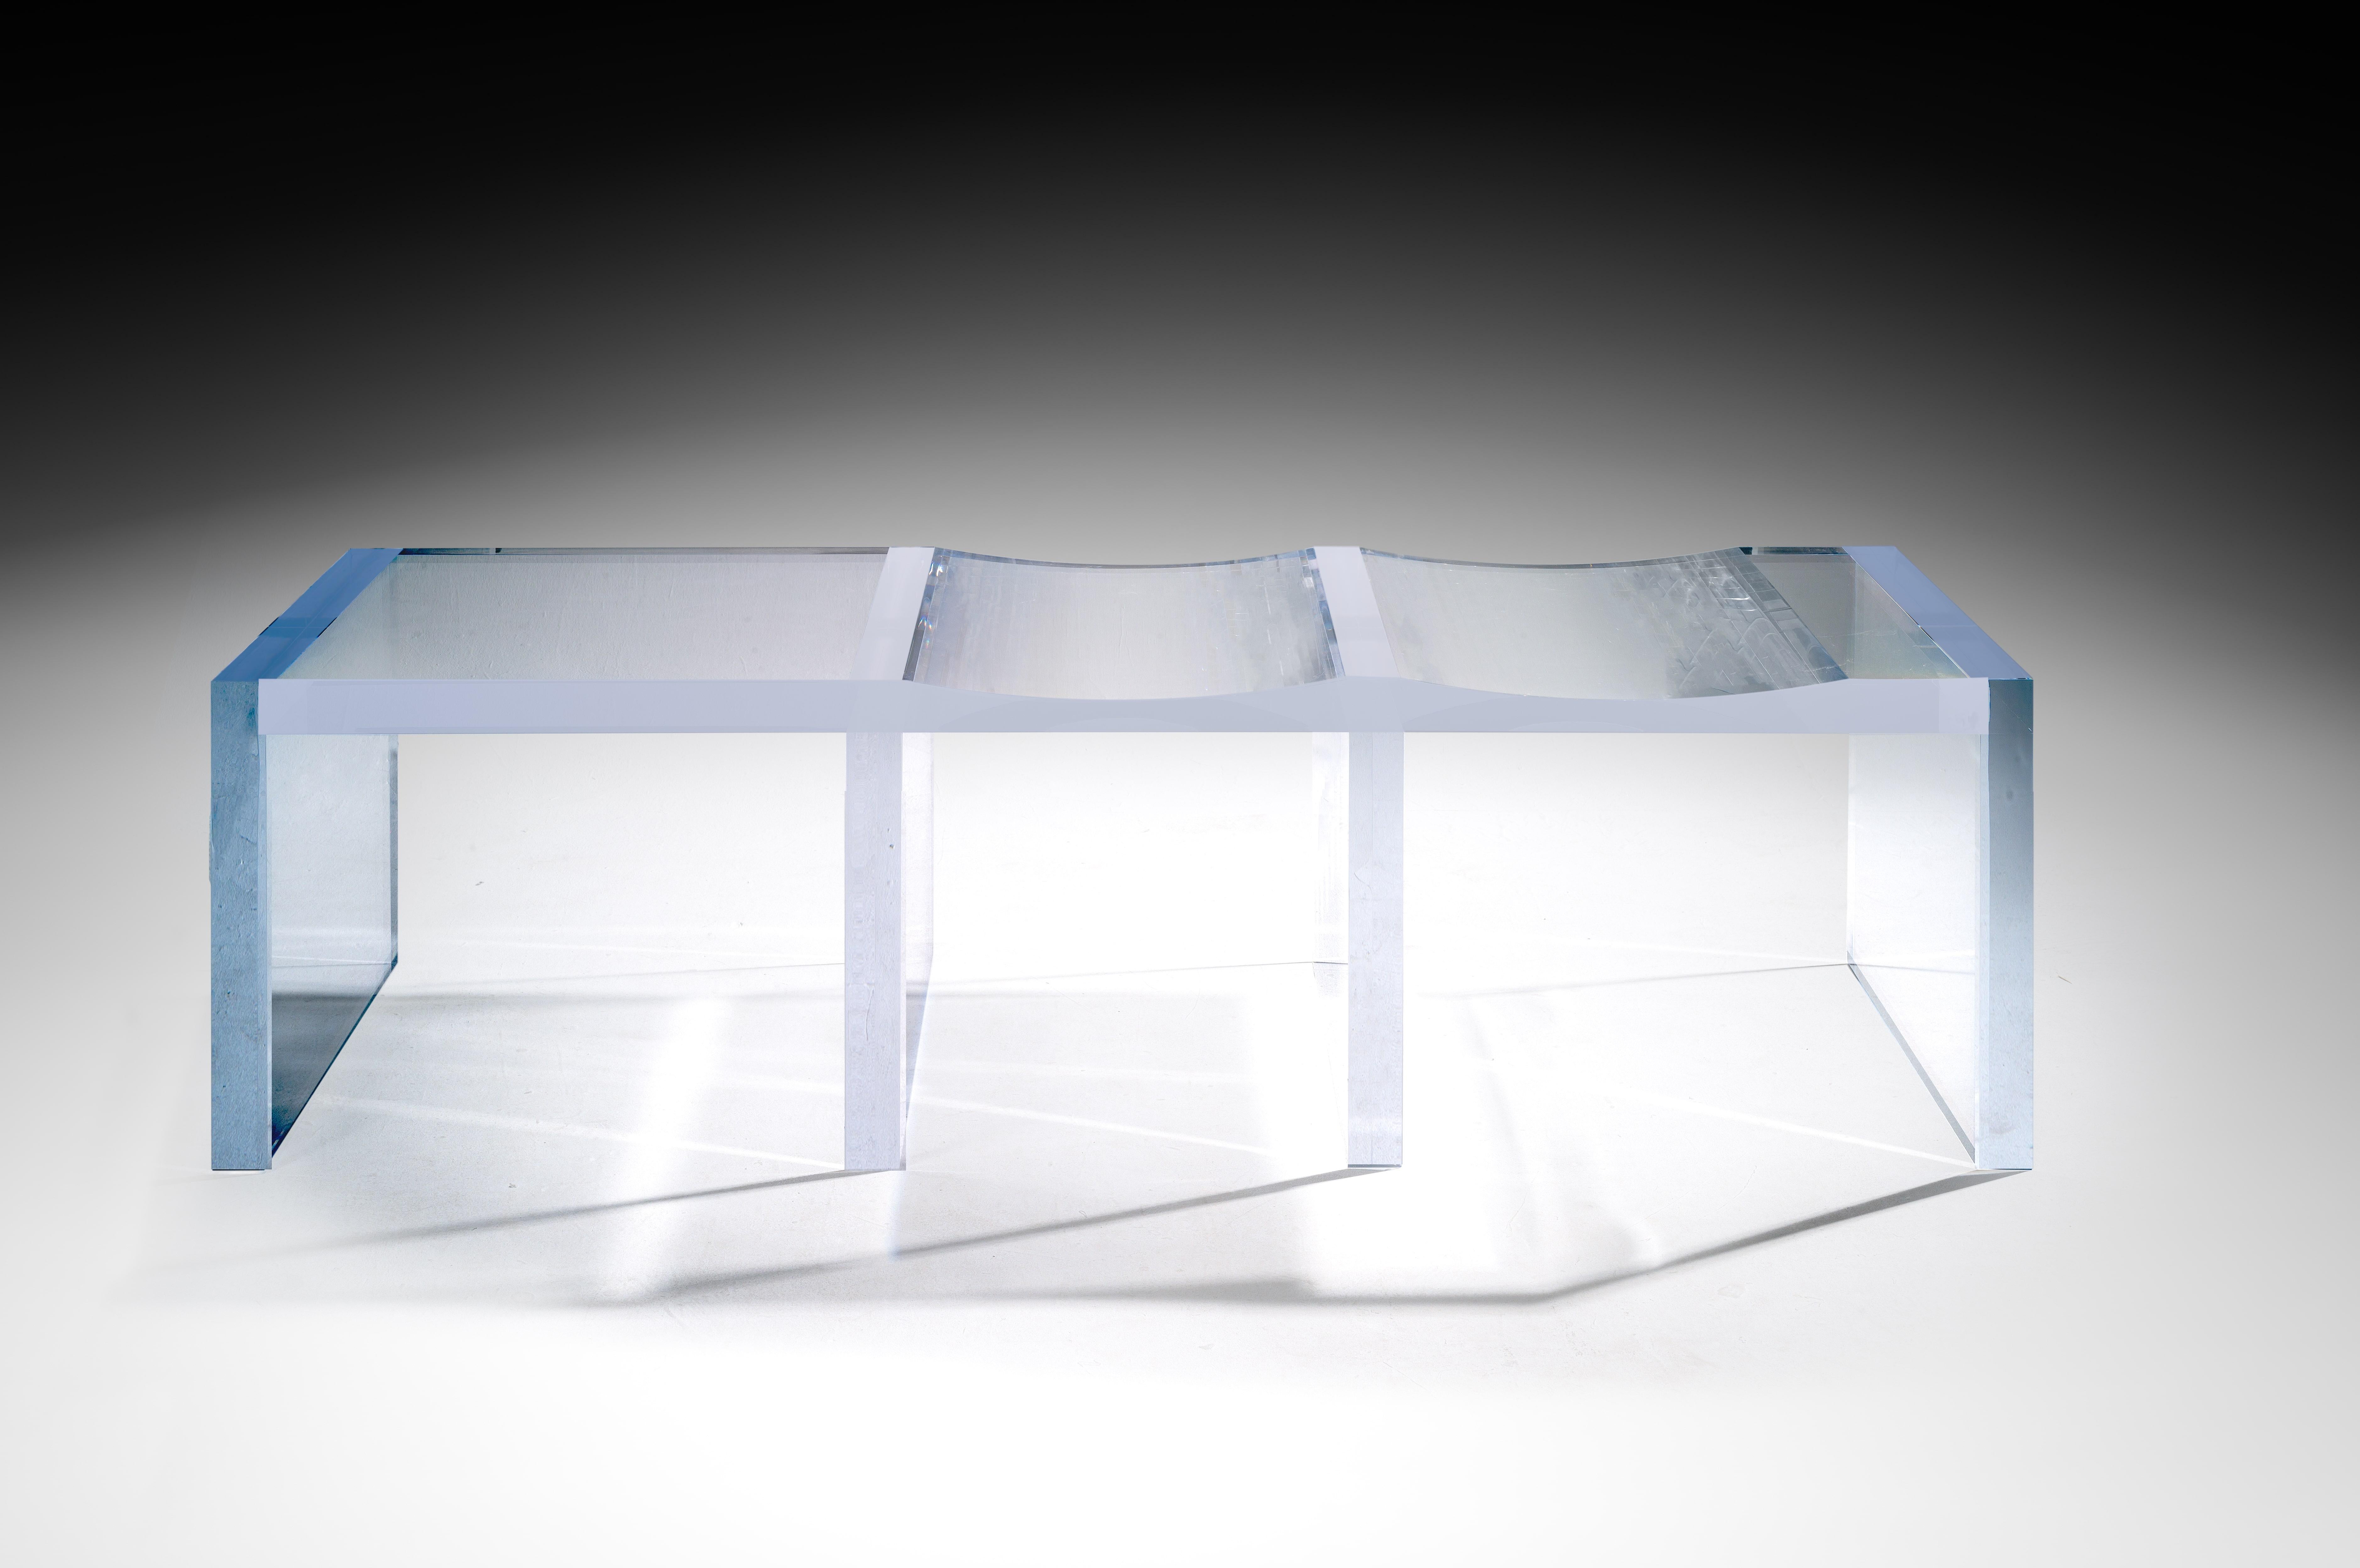 Ghost Bench by Charly Bounan
One of a Kind
Dimensions: D 75 x W 200 x H 56 cm. 
Materials: Acrylic glass.

Bench for 4 people. Please contact us.

Charly Bounan, is a Parisian designer renowned for its refined creative style and the important